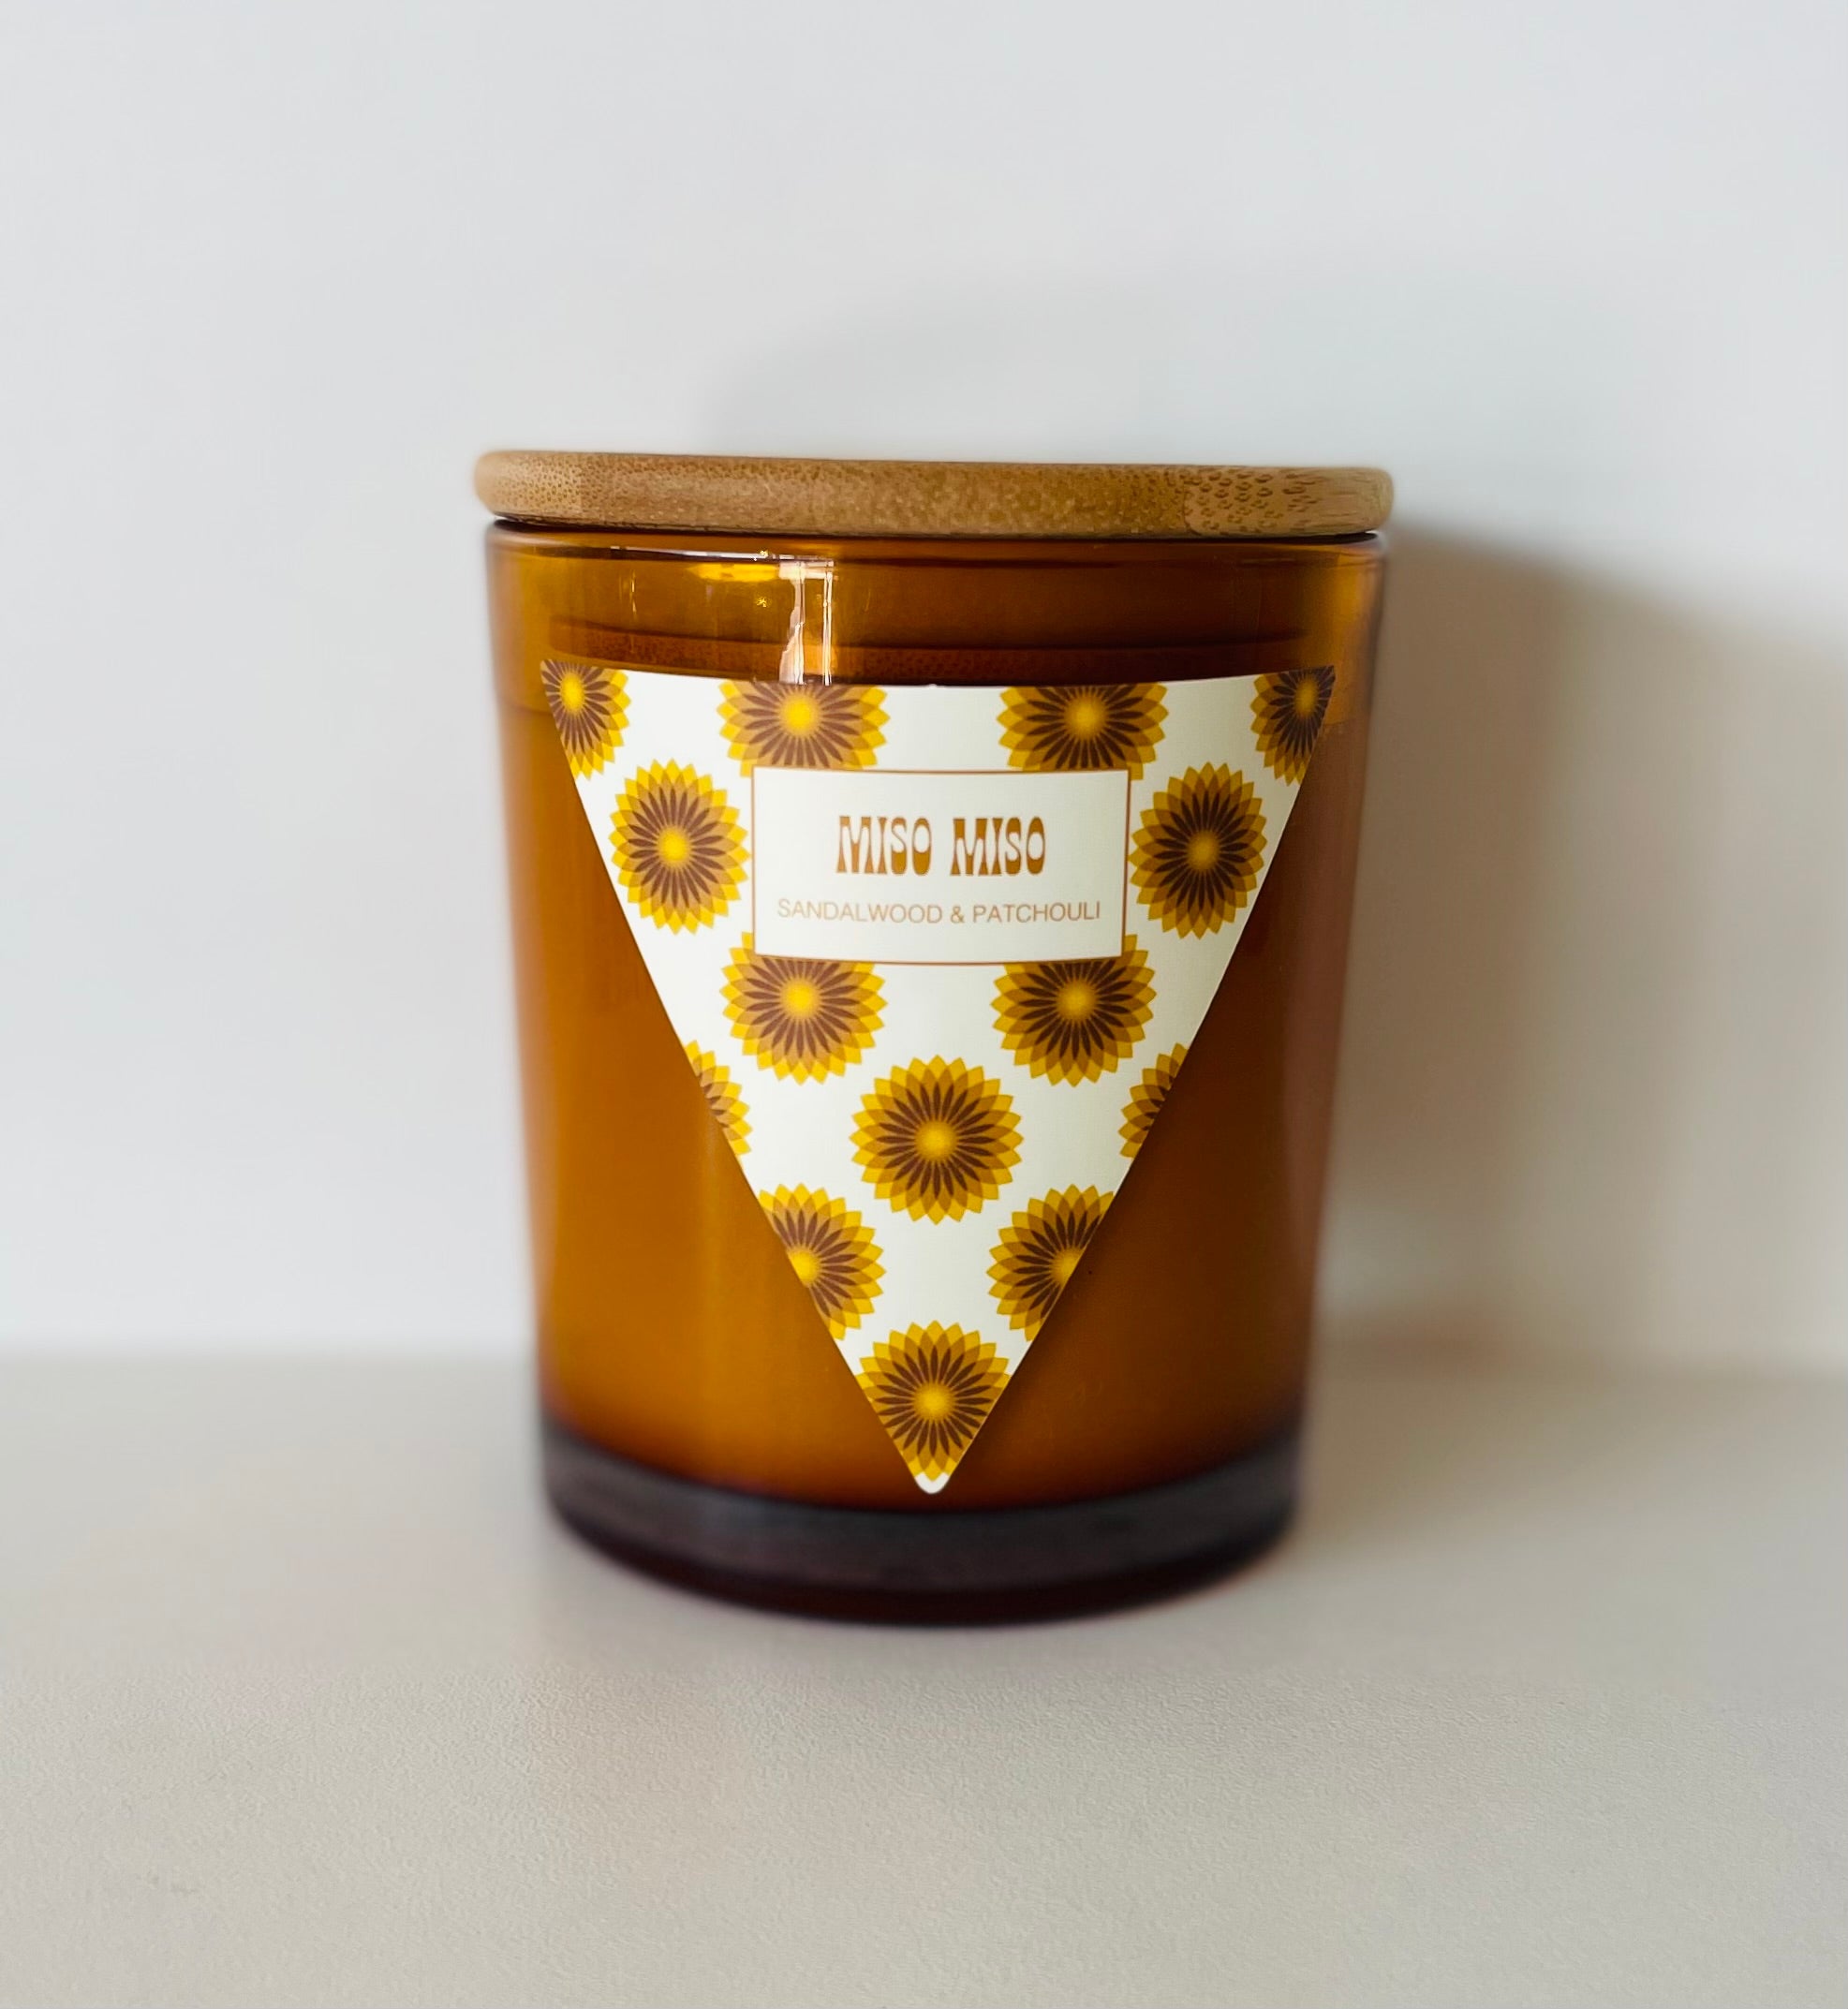 Miso Miso Scented Candle - Sandalwood & Patchouli